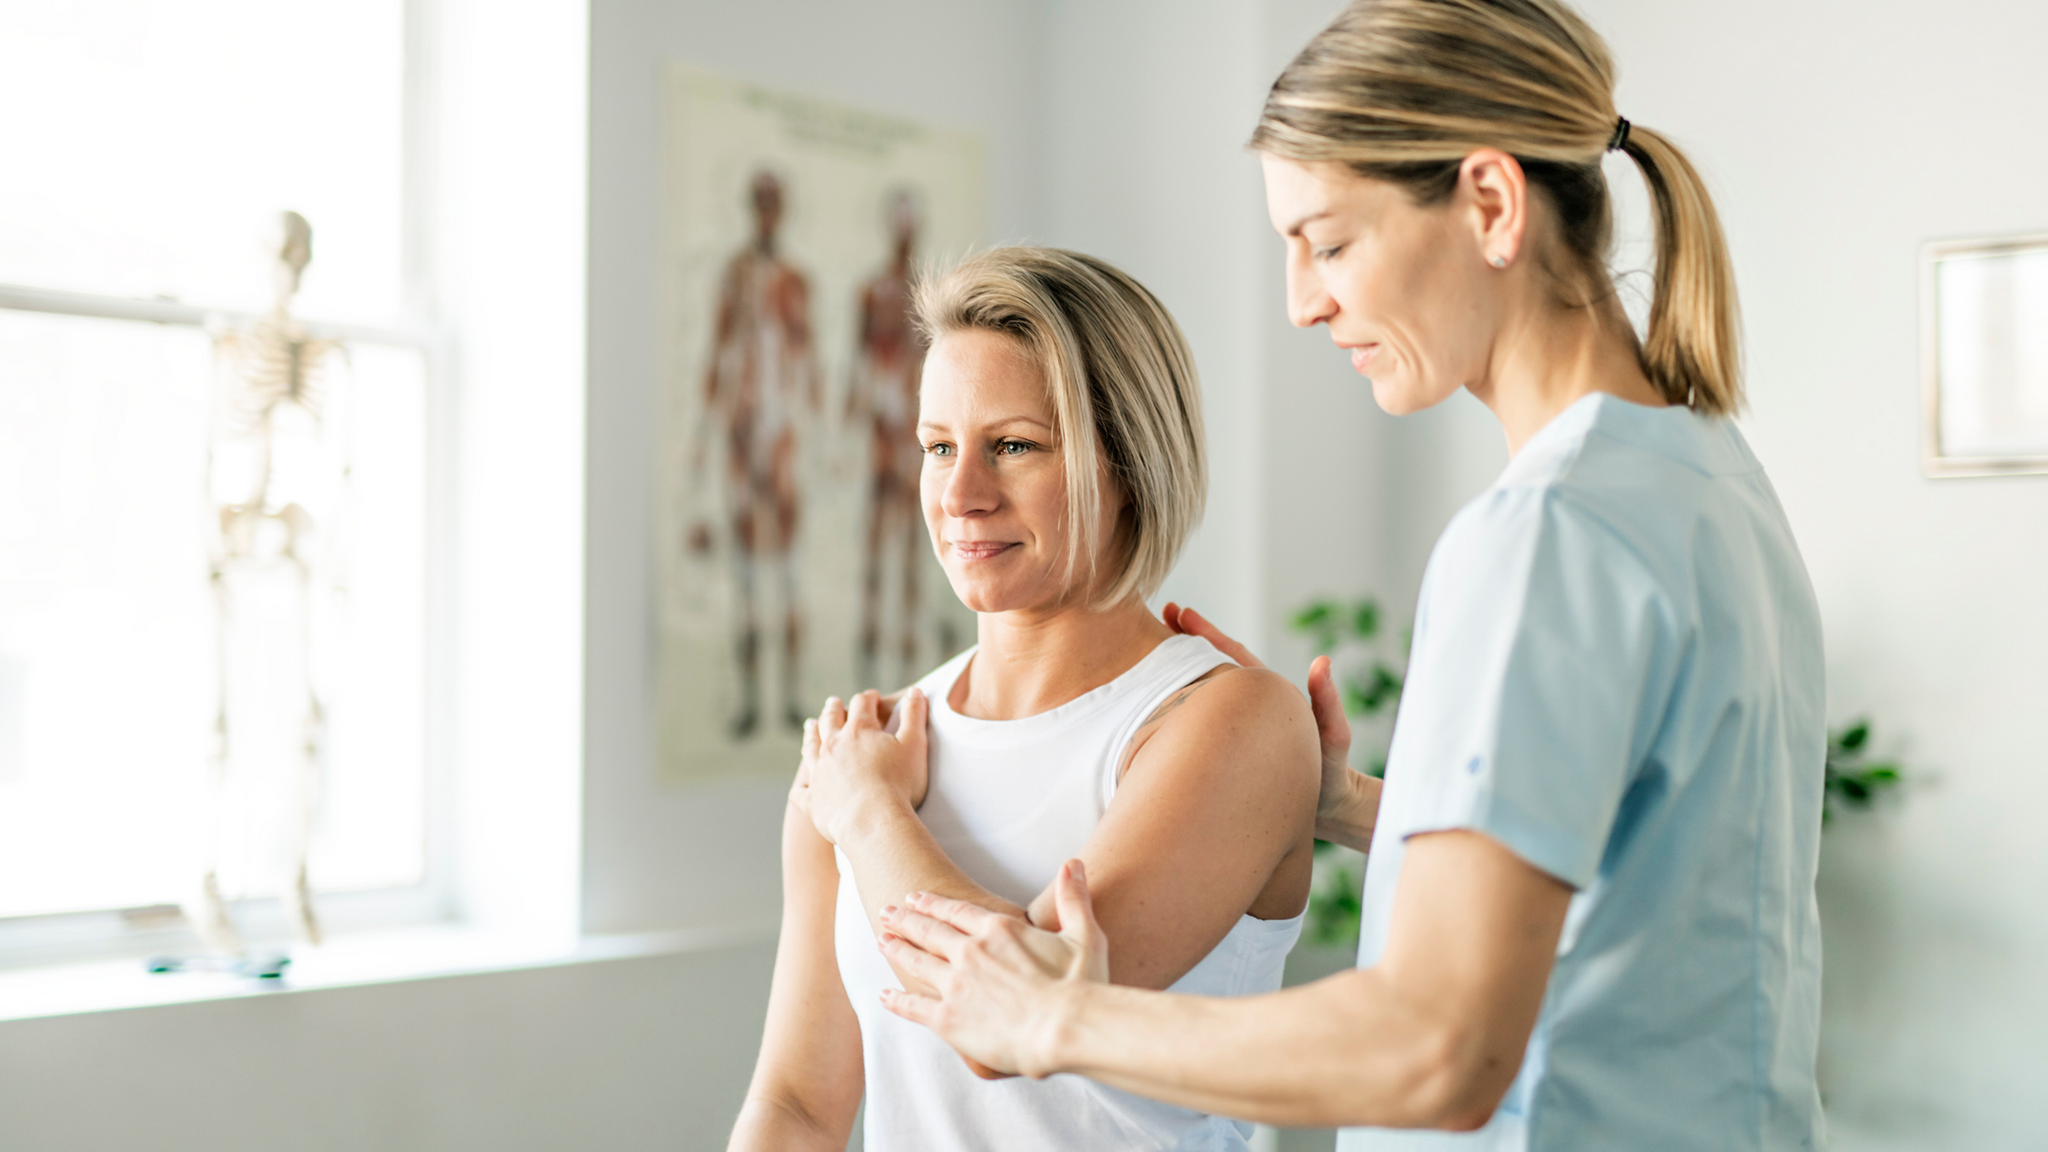 Free FlexEze Heat Wrap and Heat Patch Sample Pack for Health Professionals. Physiotherapist, Osteopath, Chiropractor, Allied Health, General Practitioner. FlexEze is trusted by major Australian Hospitals and Rehabilitation Centres for Back Pain.